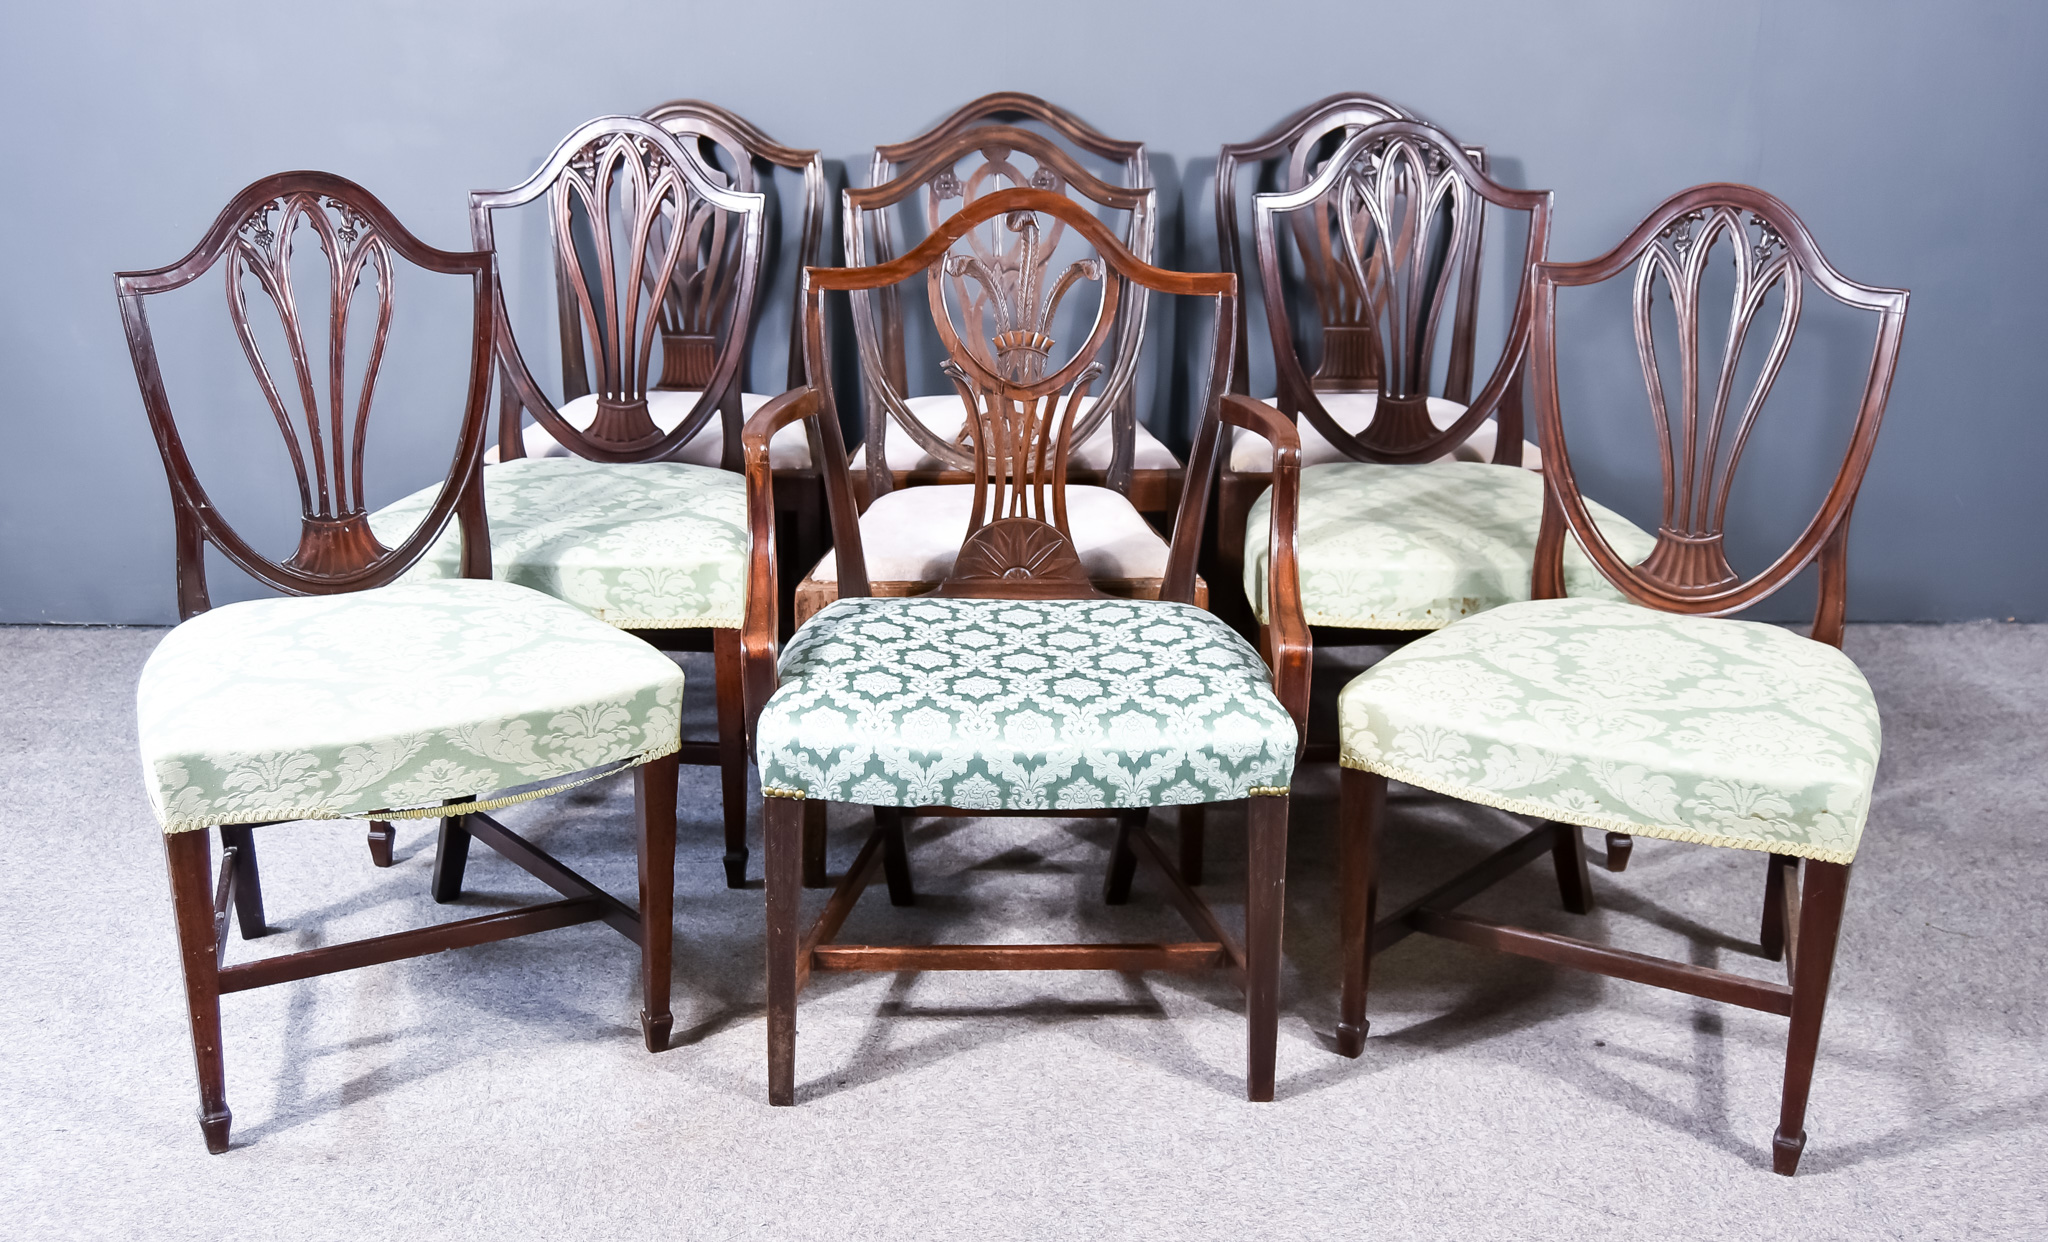 A Harlequin Set of Nine Late 18th Century Dining Chairs, of "Hepplewhite" design, the shaped back